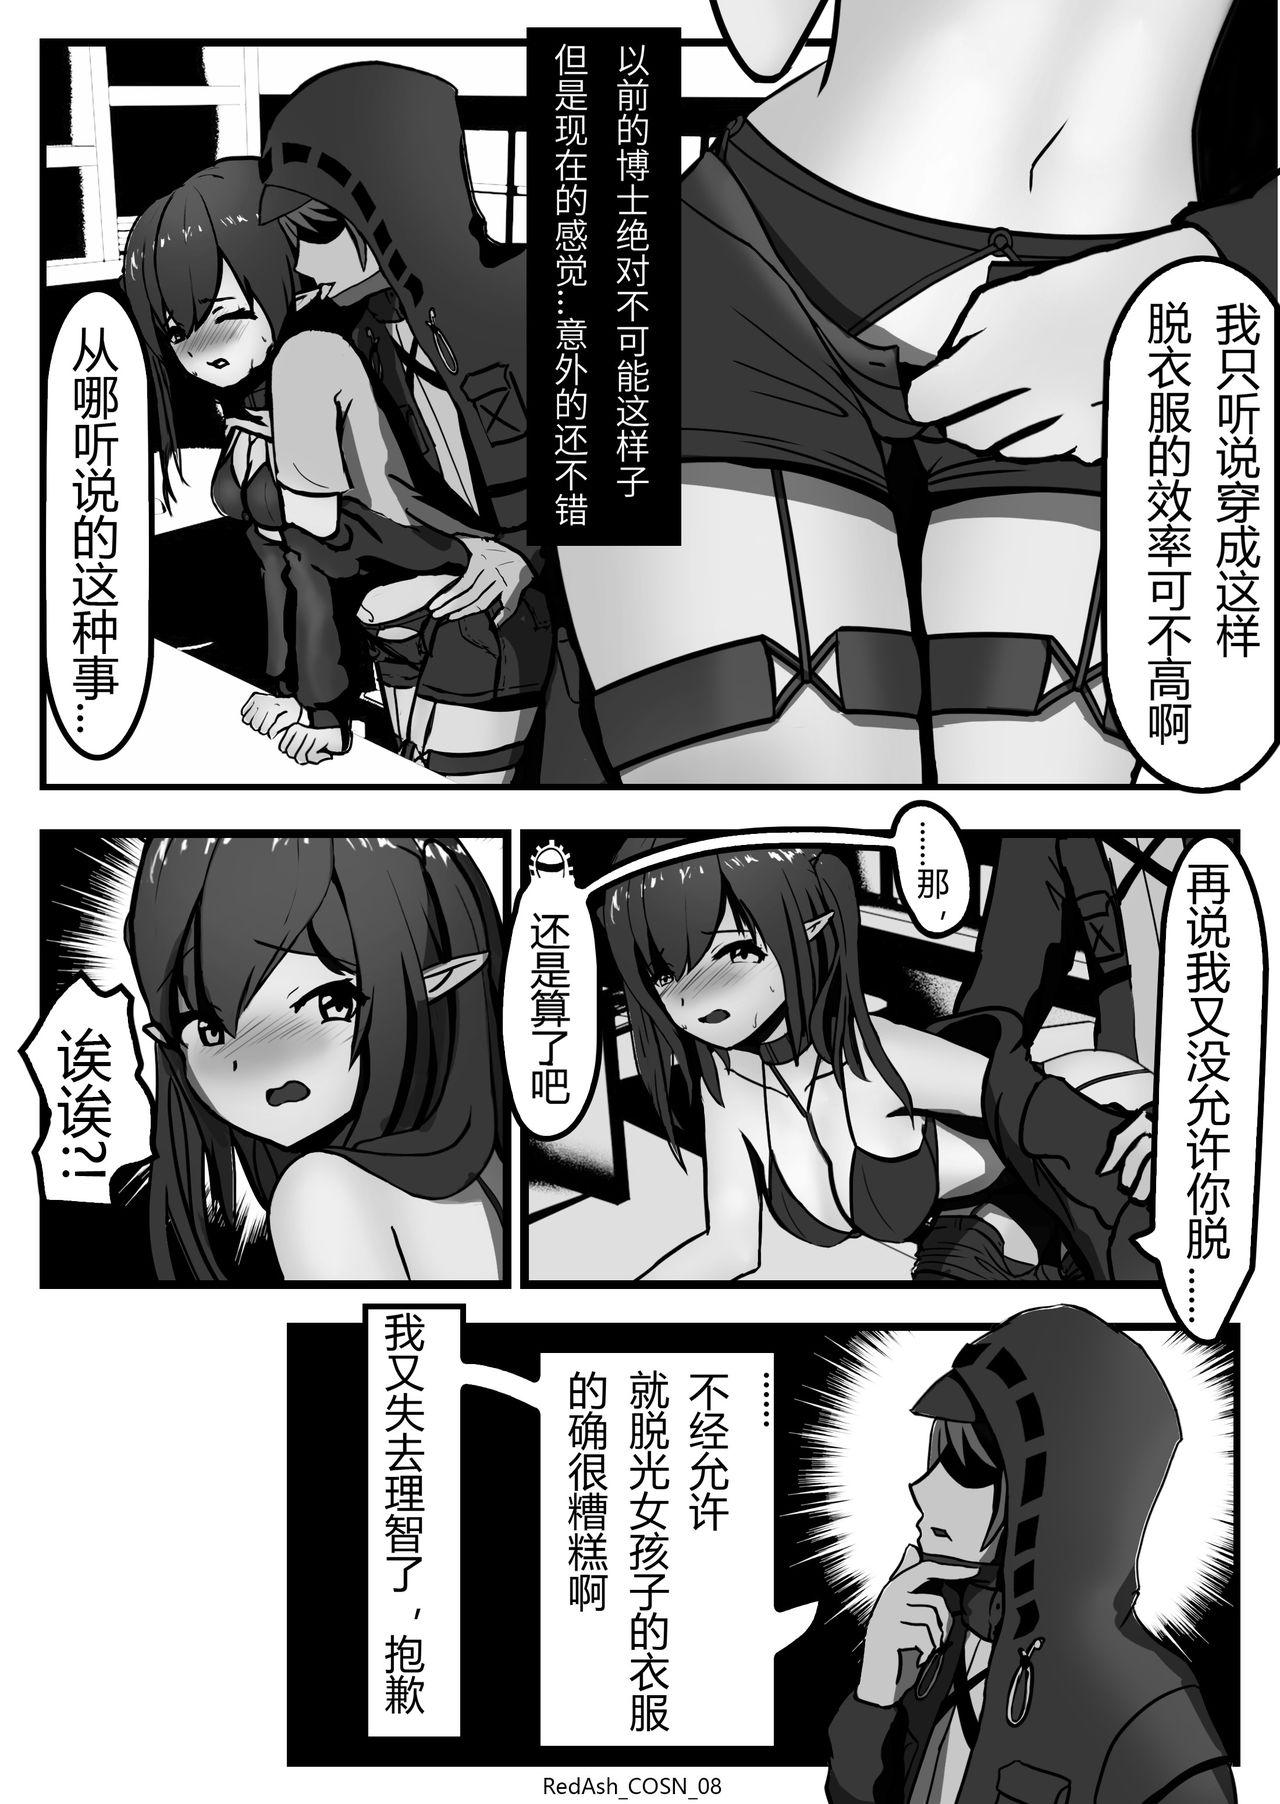 Dorm 可露希尔大减价! | Closure is On Sale Now! - Arknights Delicia - Page 9